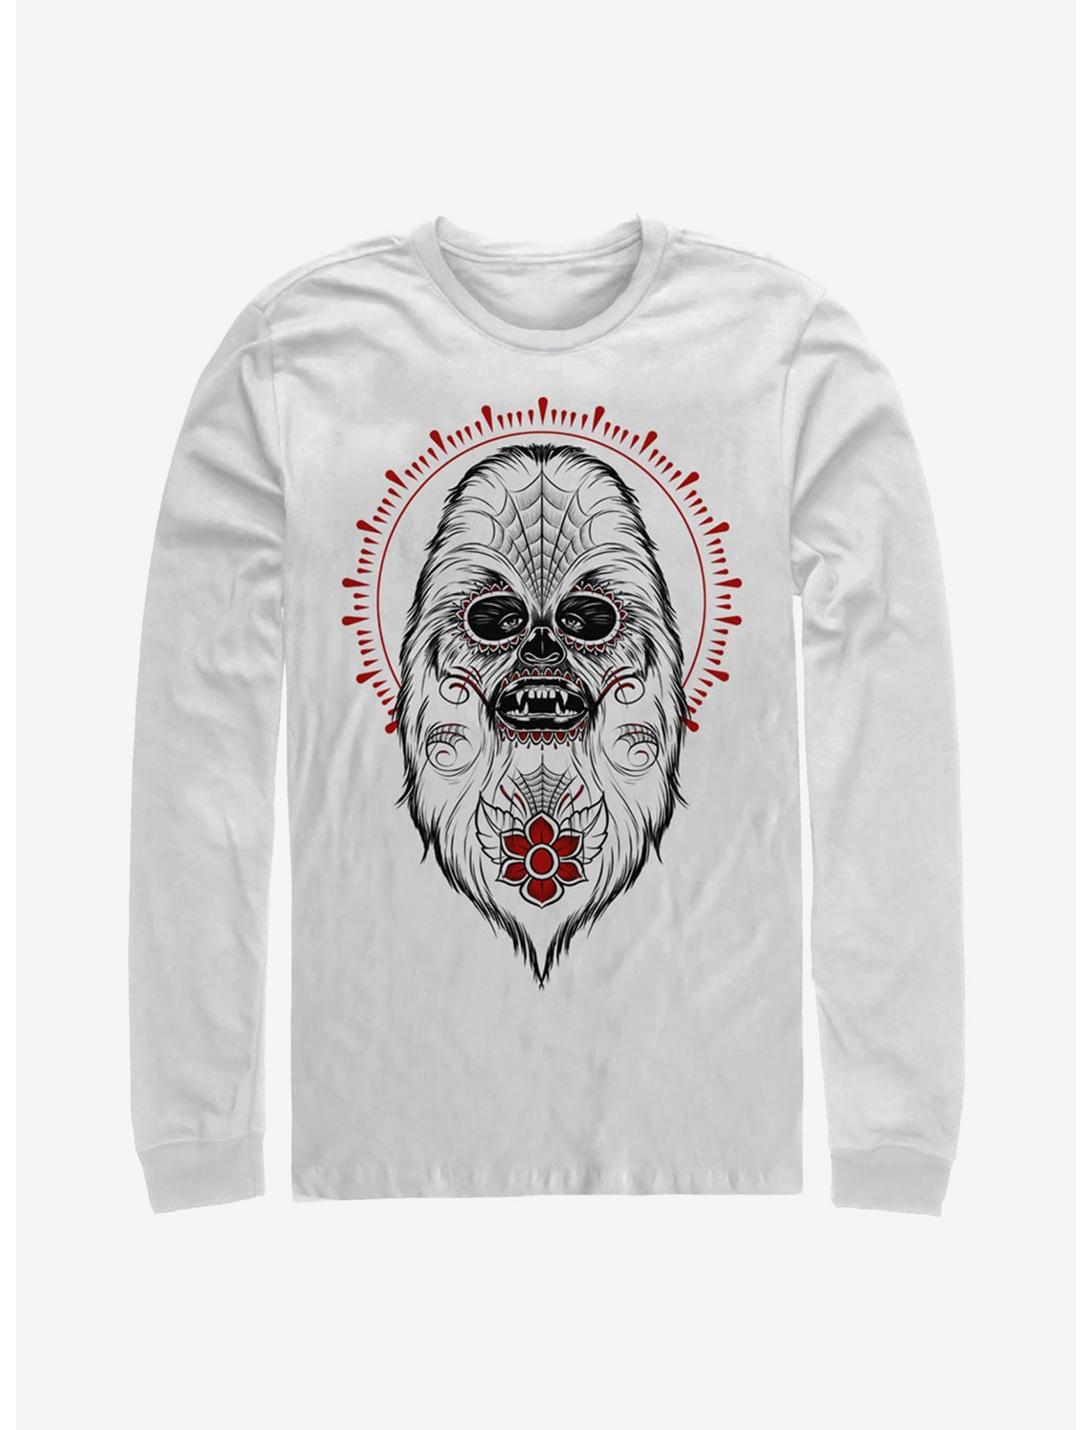 Star Wars Day Of The Dead Chewbacca Long-Sleeve T-Shirt, WHITE, hi-res